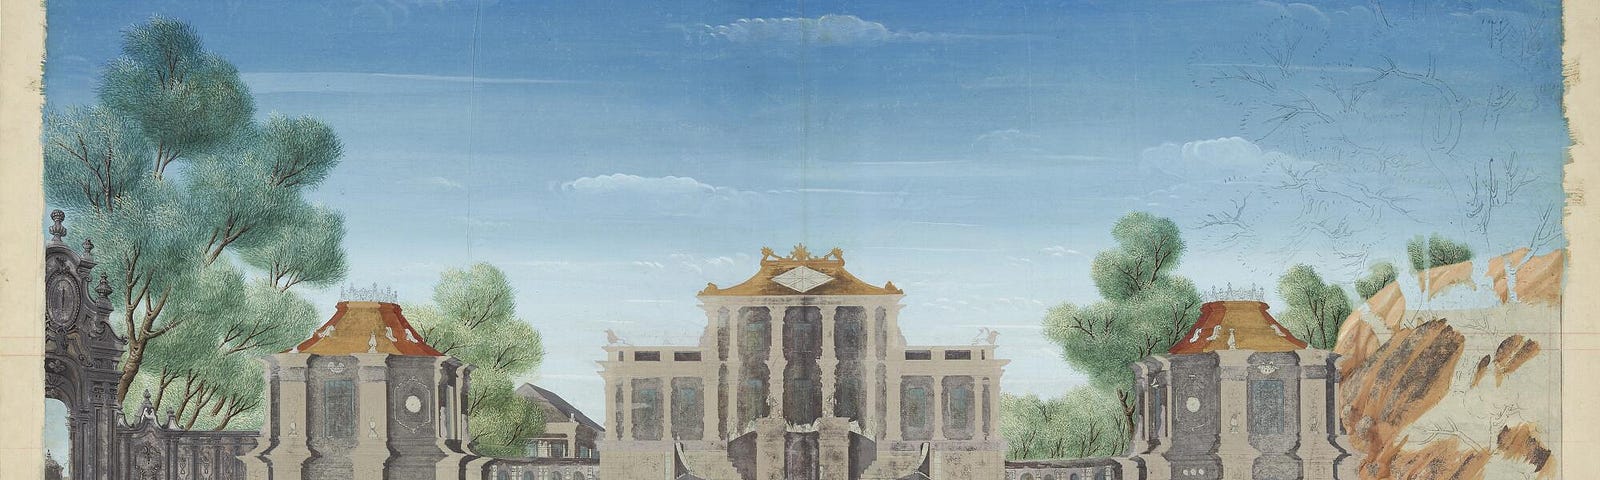 Symmetrically constructed palace façade with flanking arches and towers. Mostly shades of grey with gold roofs. Two outside staircases turn inwards behind retaining wall. Small blue pool in front of retaining wall and a larger blue pool across bottom of the image. Blue sky above, and green trees behind and to the sides of the palace.